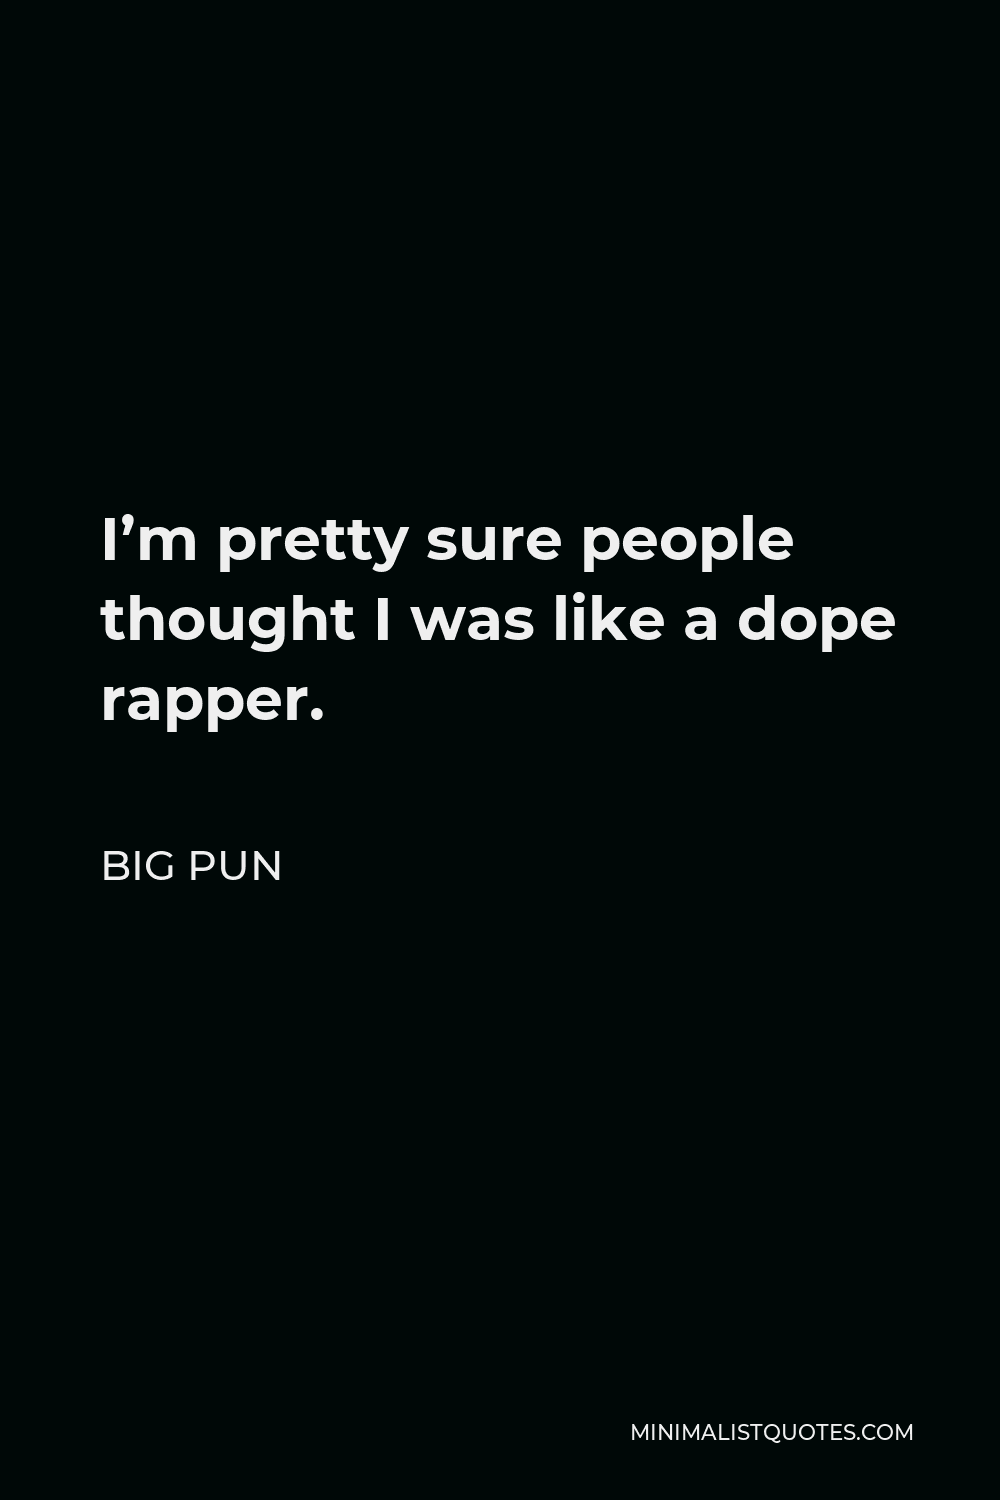 Big Pun Quote - I’m pretty sure people thought I was like a dope rapper.